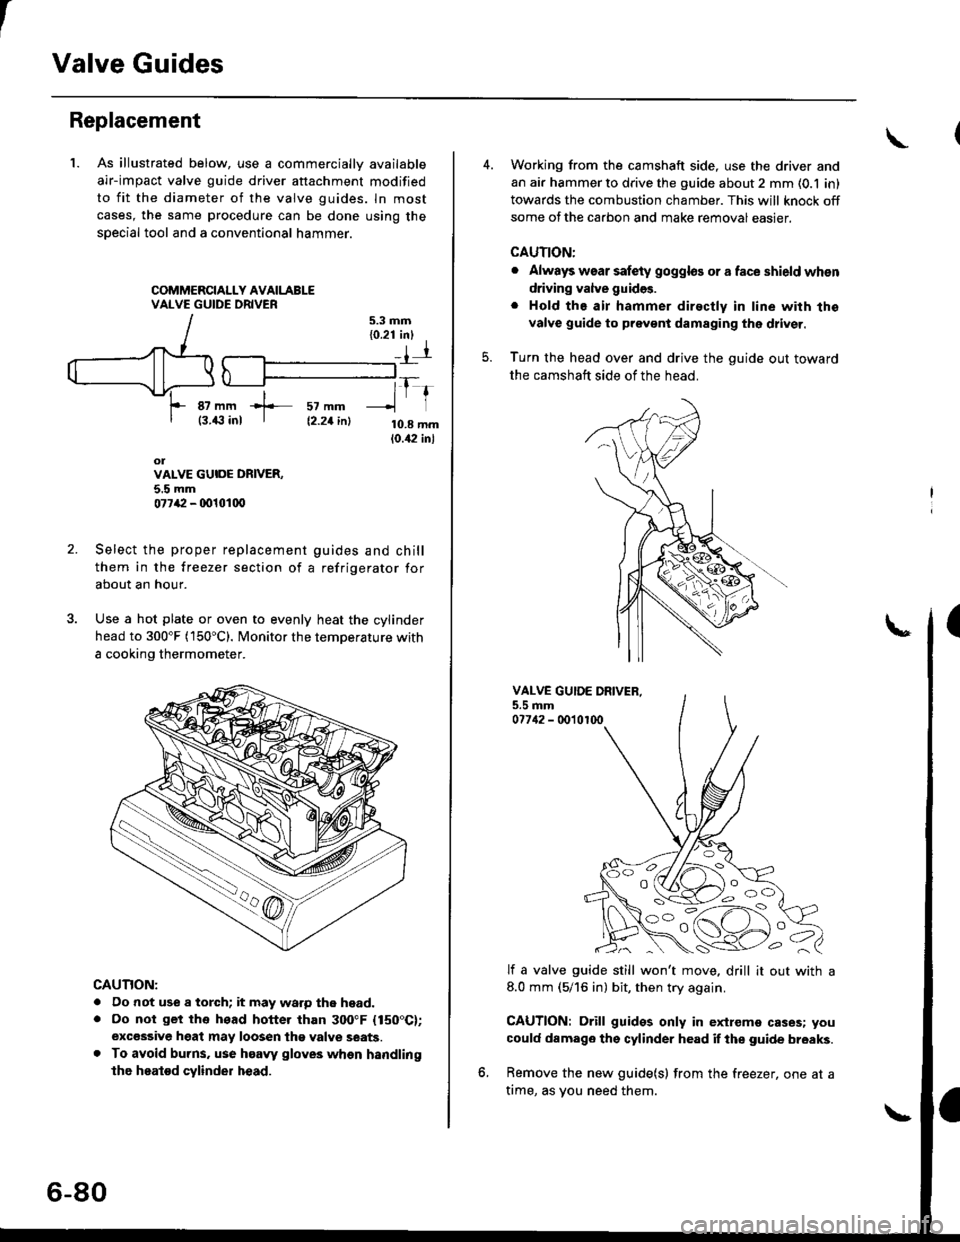 HONDA CIVIC 1998 6.G Workshop Manual t
Valve Guides
Replacement
1. As illustrated below, use a commerciallv available
air-impact valve guide driver attachment modified
to fit the diameter of the valve guides. ln most
cases, the same proc